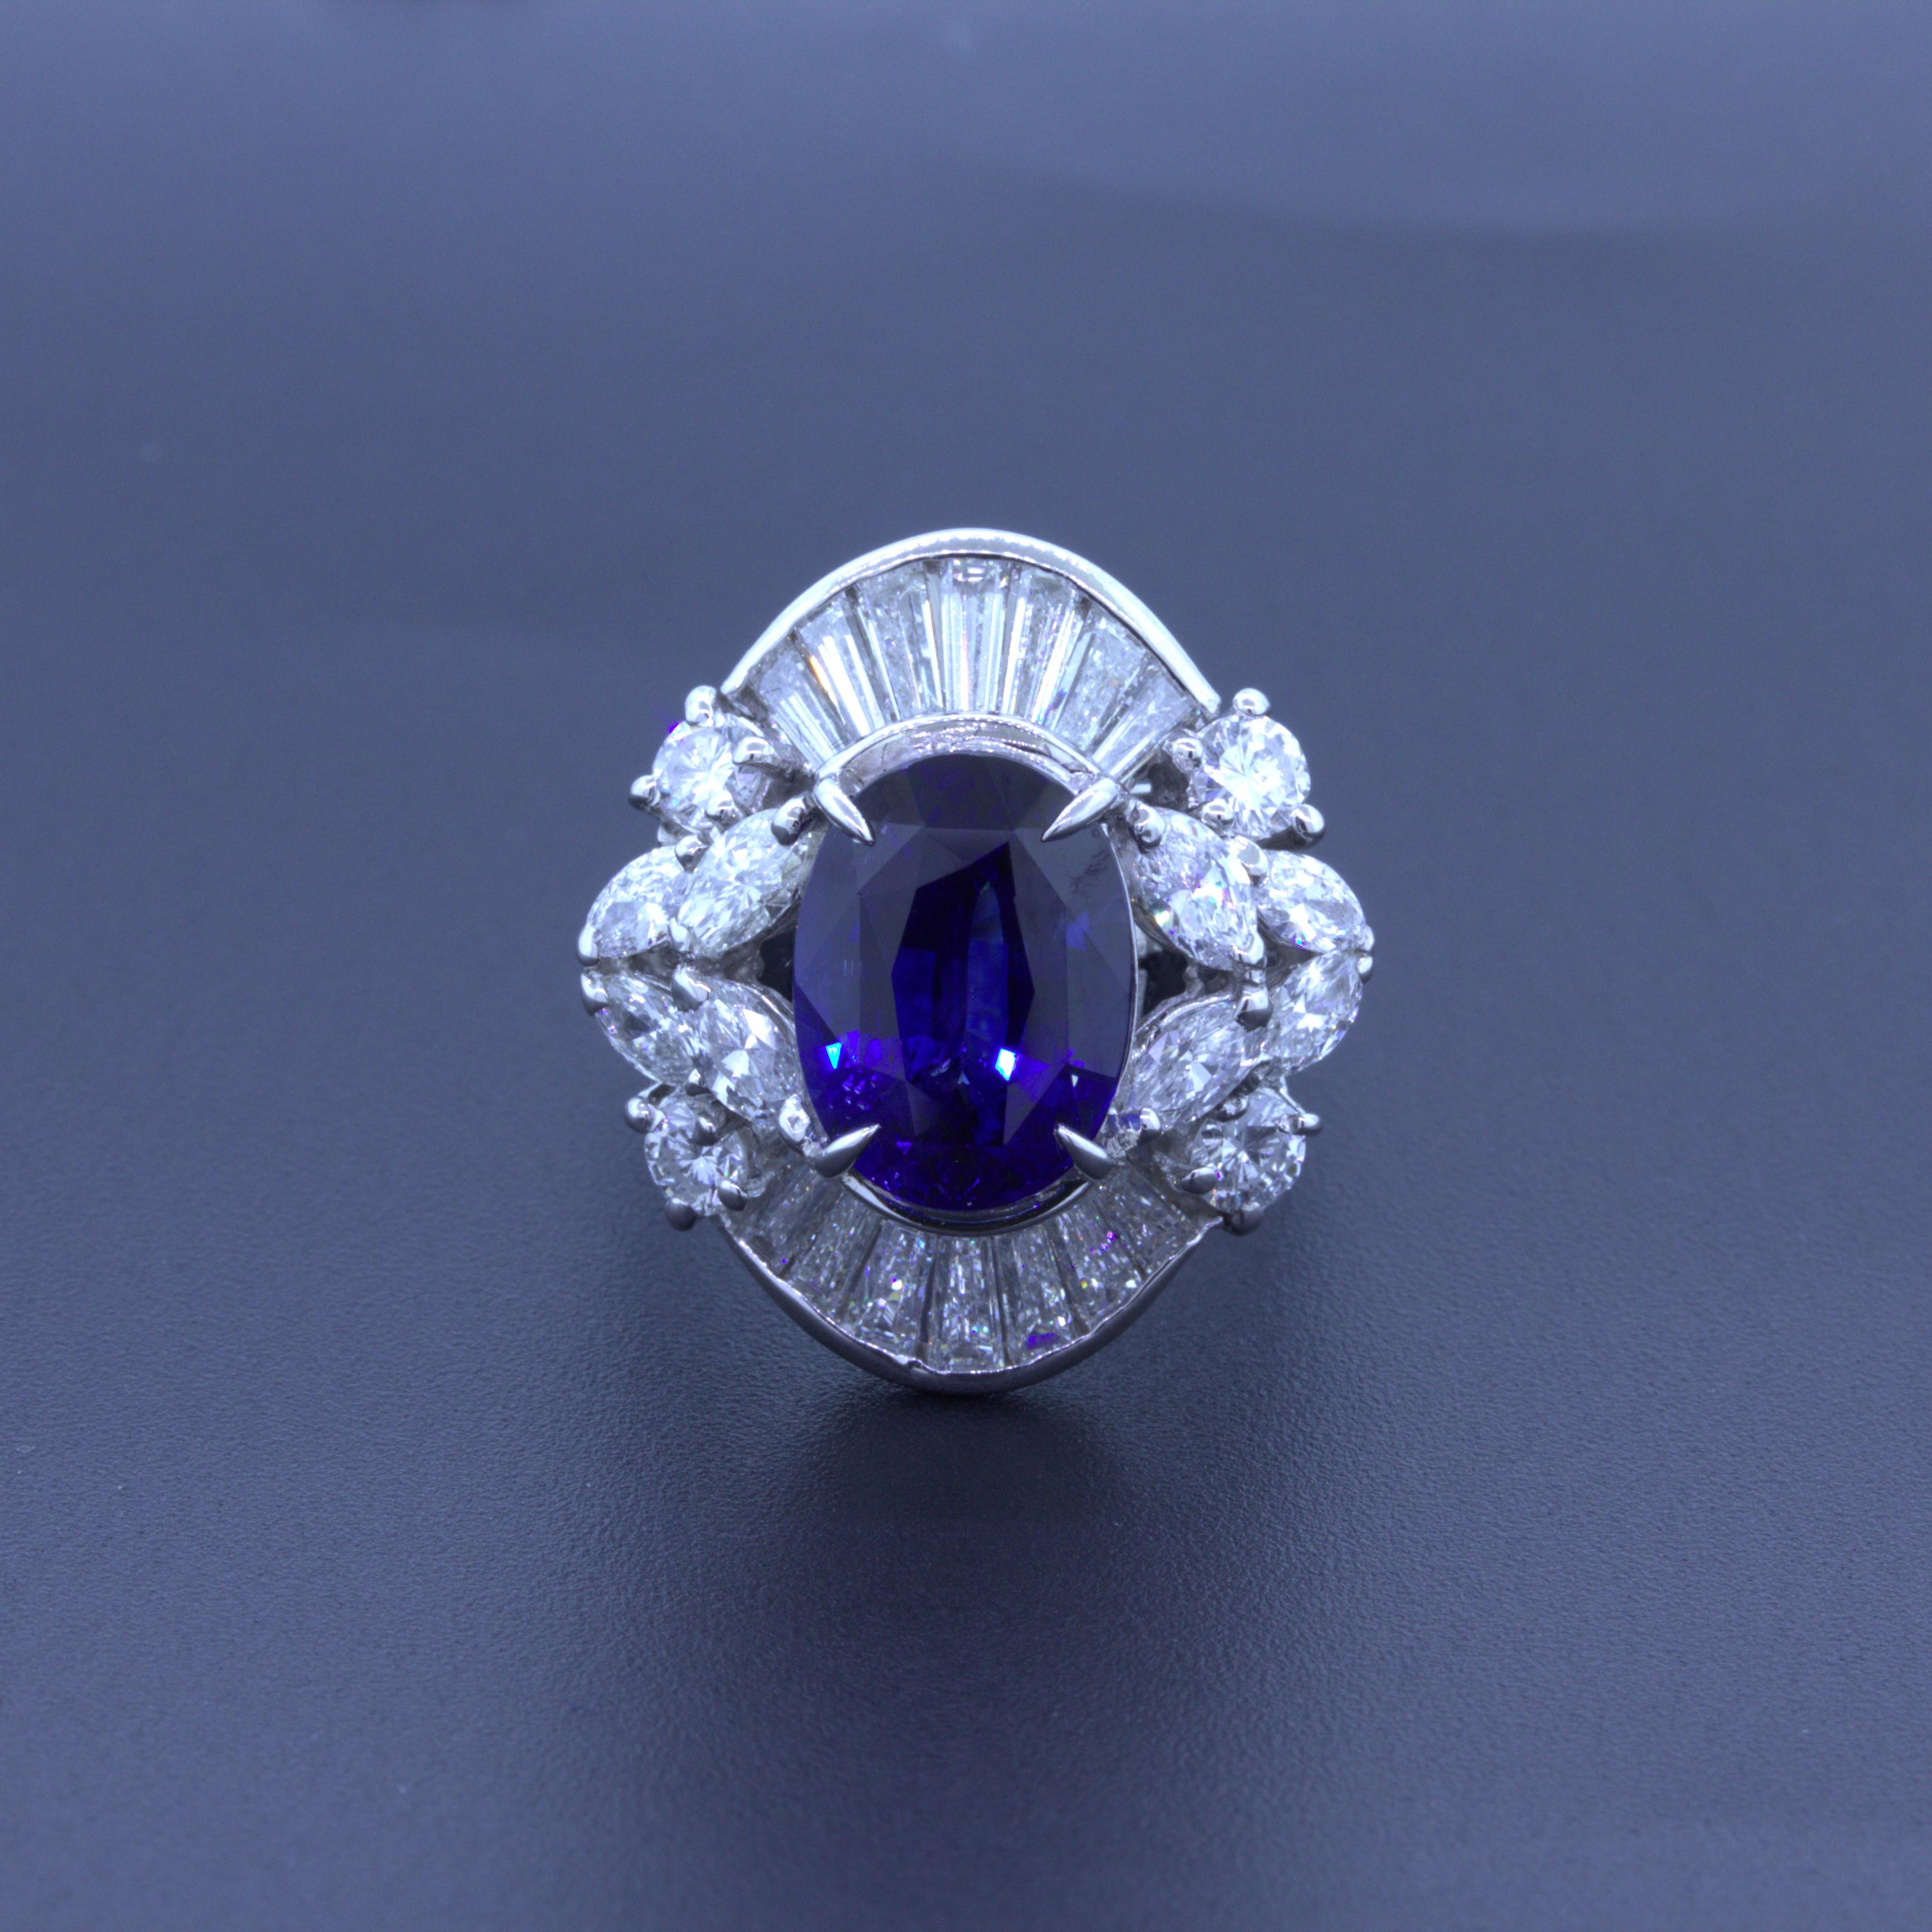 An elegant and stylish ring featuring a fine 5.67 carat blue sapphire. It has a rich and vibrant blue color with excellent brilliance and light return. It is complemented by 3.02 carats of marquise, baguette, and round brilliant-cut diamonds set